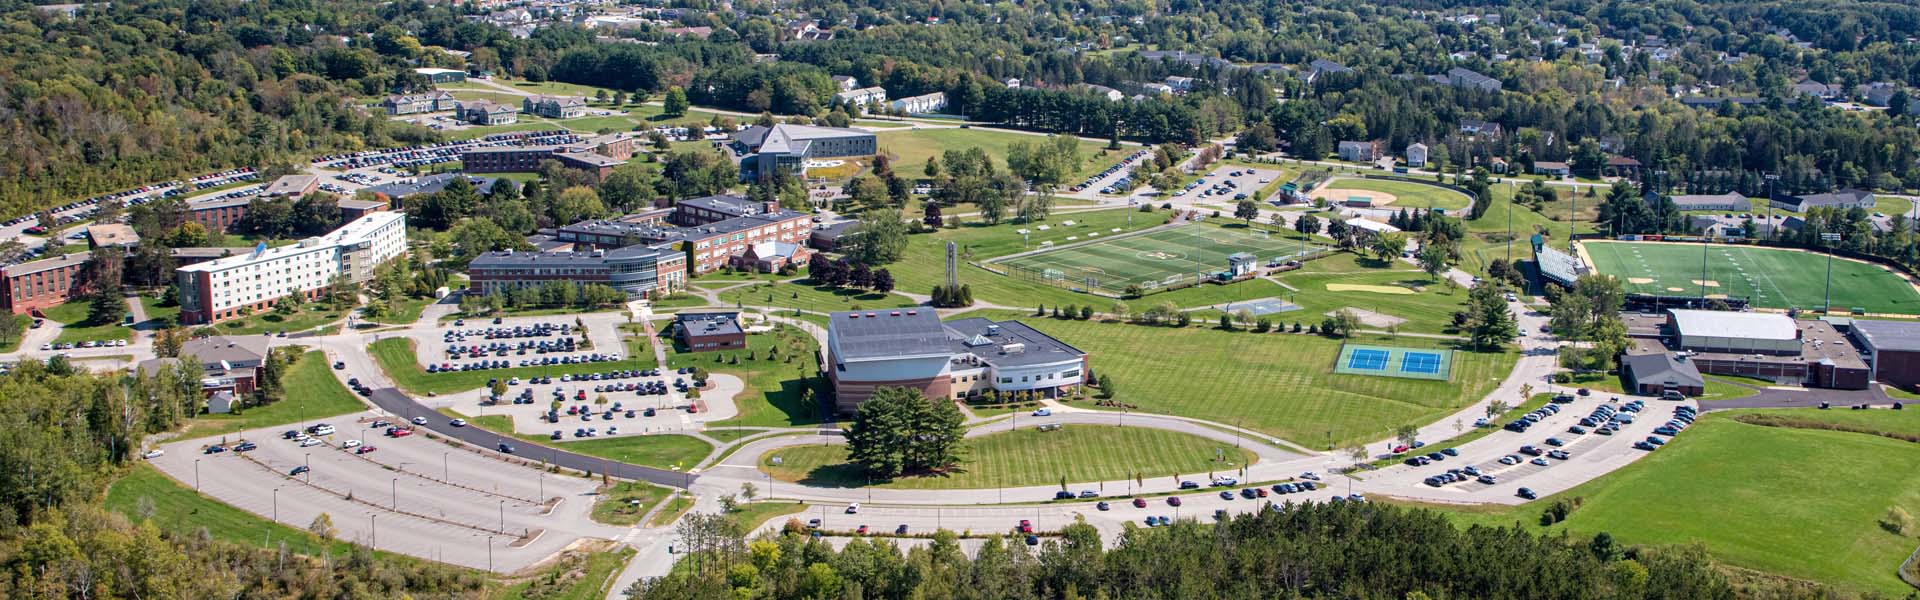 Exterior view of the Husson University campus